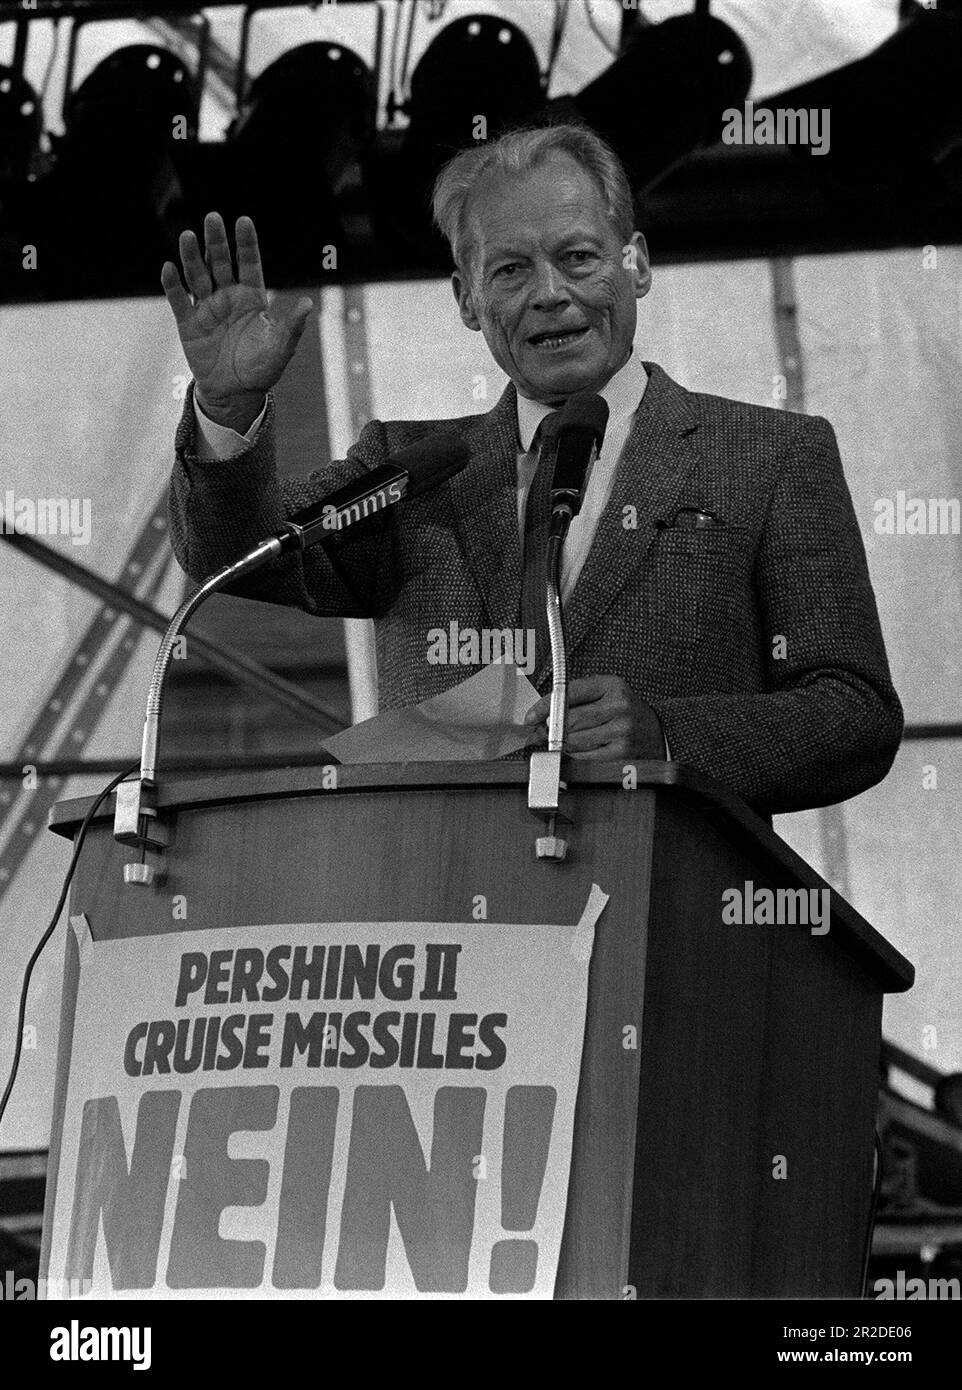 ARCHIVE PHOTO: The SPD will be 160 years old on May 23, 2023, SPD chairman Willy BRANDT, politician, speaks at the People's Assembly for Peace in Bonn's Hofgarten, stands at the lectern, with a poster on it that reads: 'Pershing II, Cruise Missiles NO', 22.10.1983, B&W photo, portrait format, ?Sven Simon#Prinzess-Luise-Strasse 41#45479 Muelheim/R uhr #tel. 0208/9413250#fax. 0208/9413260# Postgiro Essen No. 244 293 433 (BLZ 360 100 43)# www.SvenSimon.net. Stock Photo